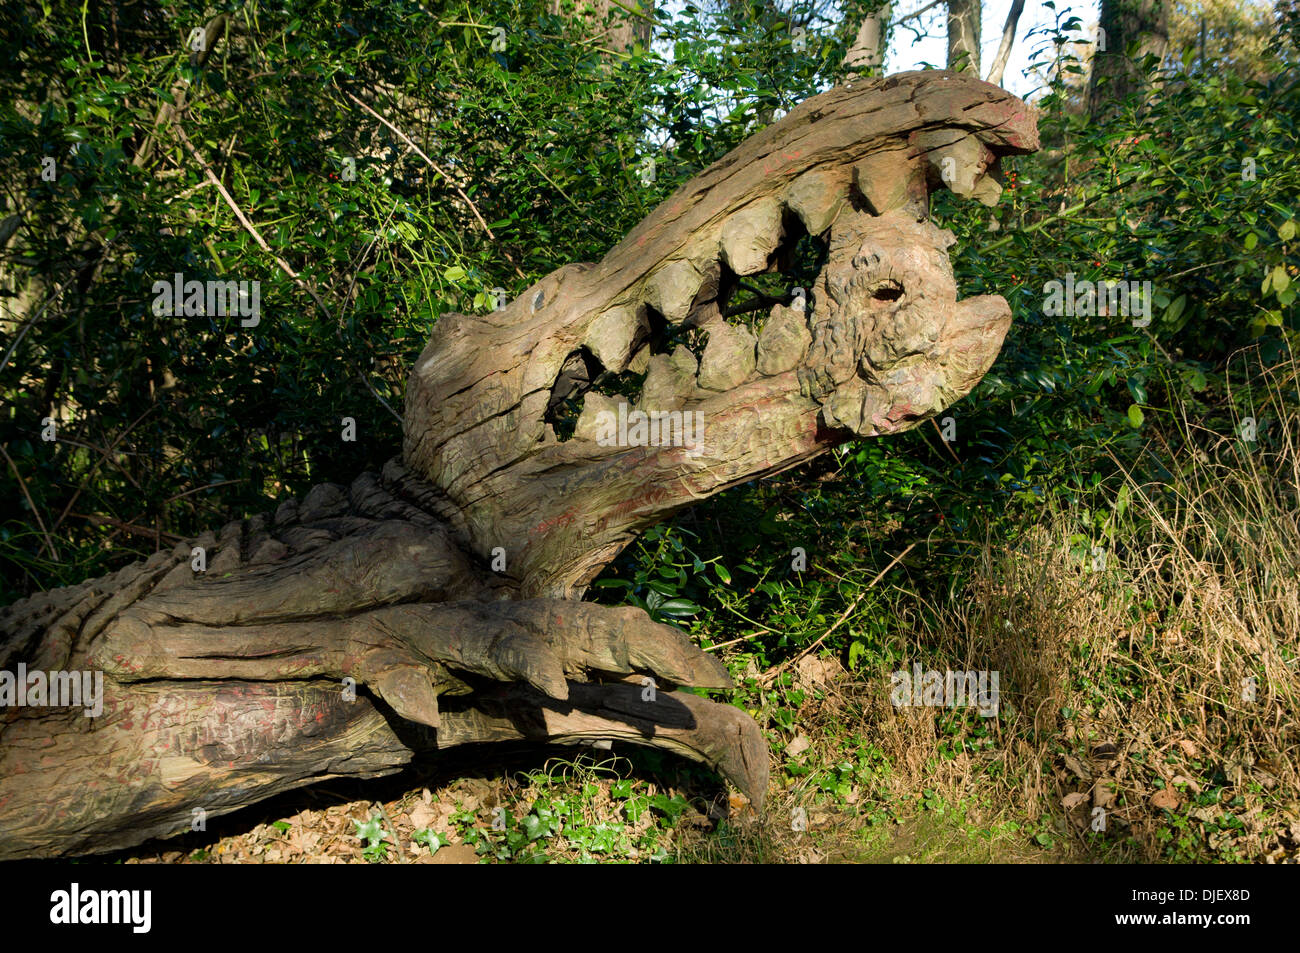 Wooden sculpture of crocodile, Margam Manor Country Park, Neath Port Talbot, South Wales. Stock Photo